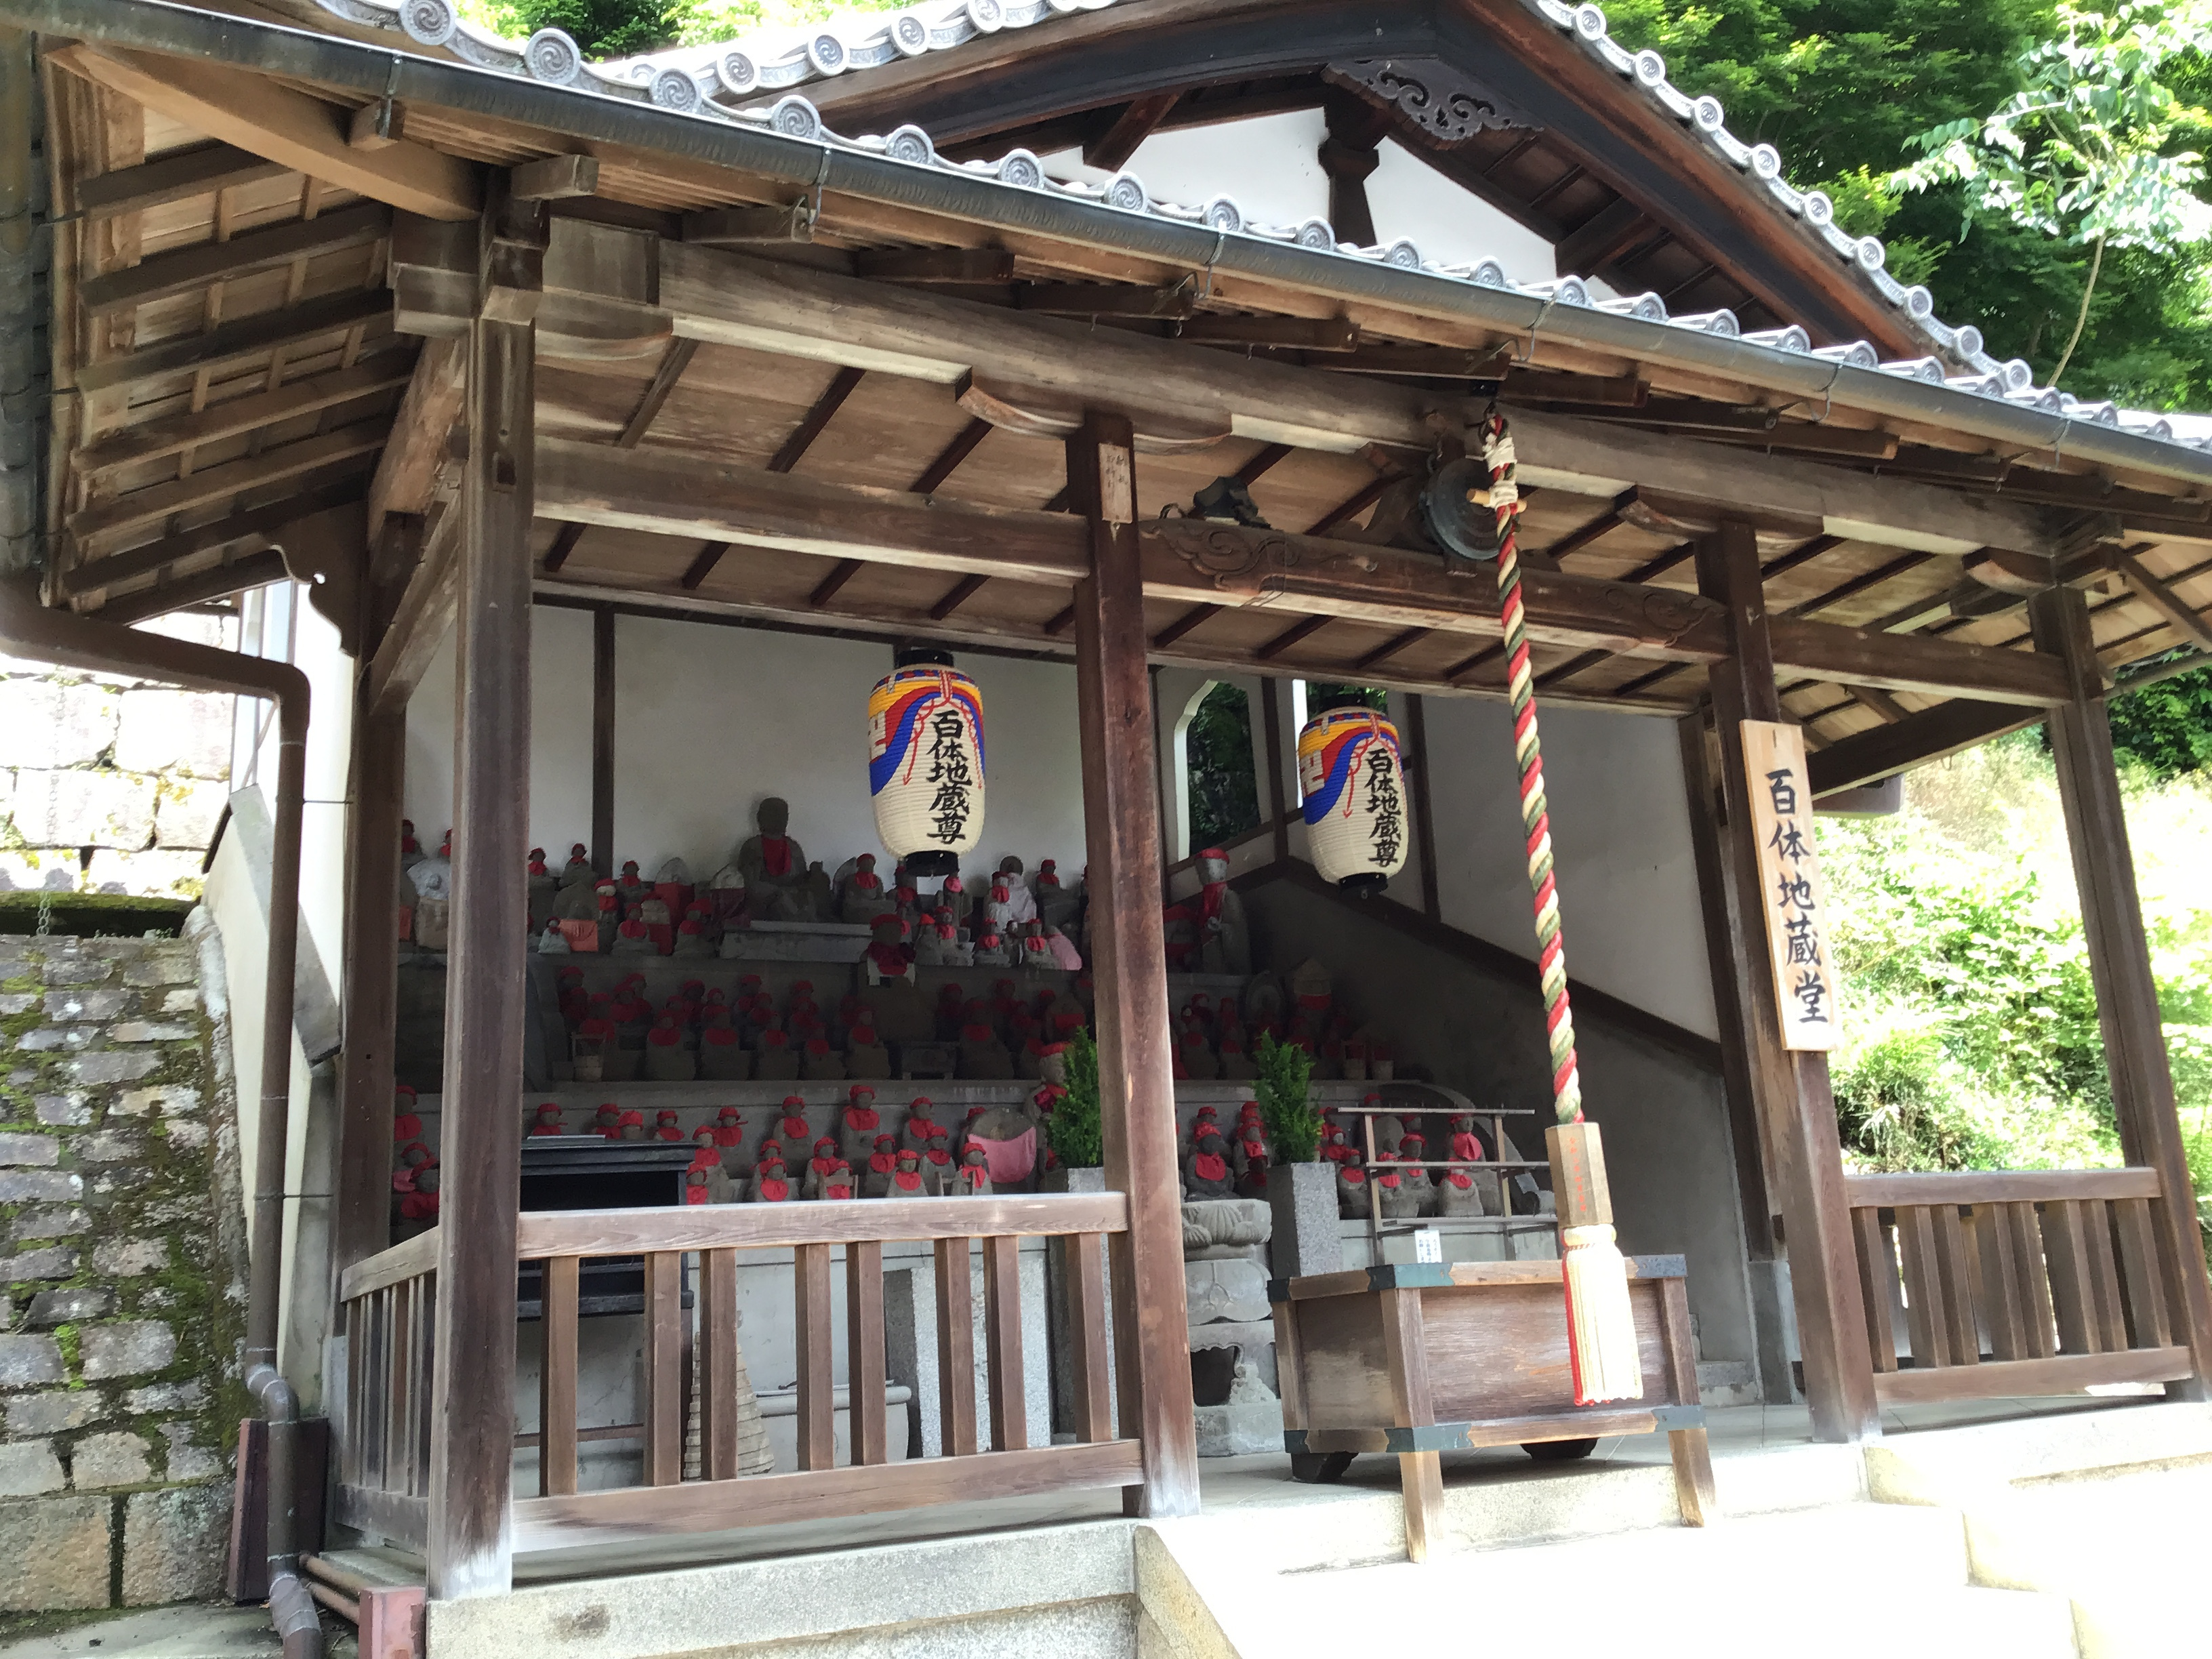 A shrine with buddhist monk statues